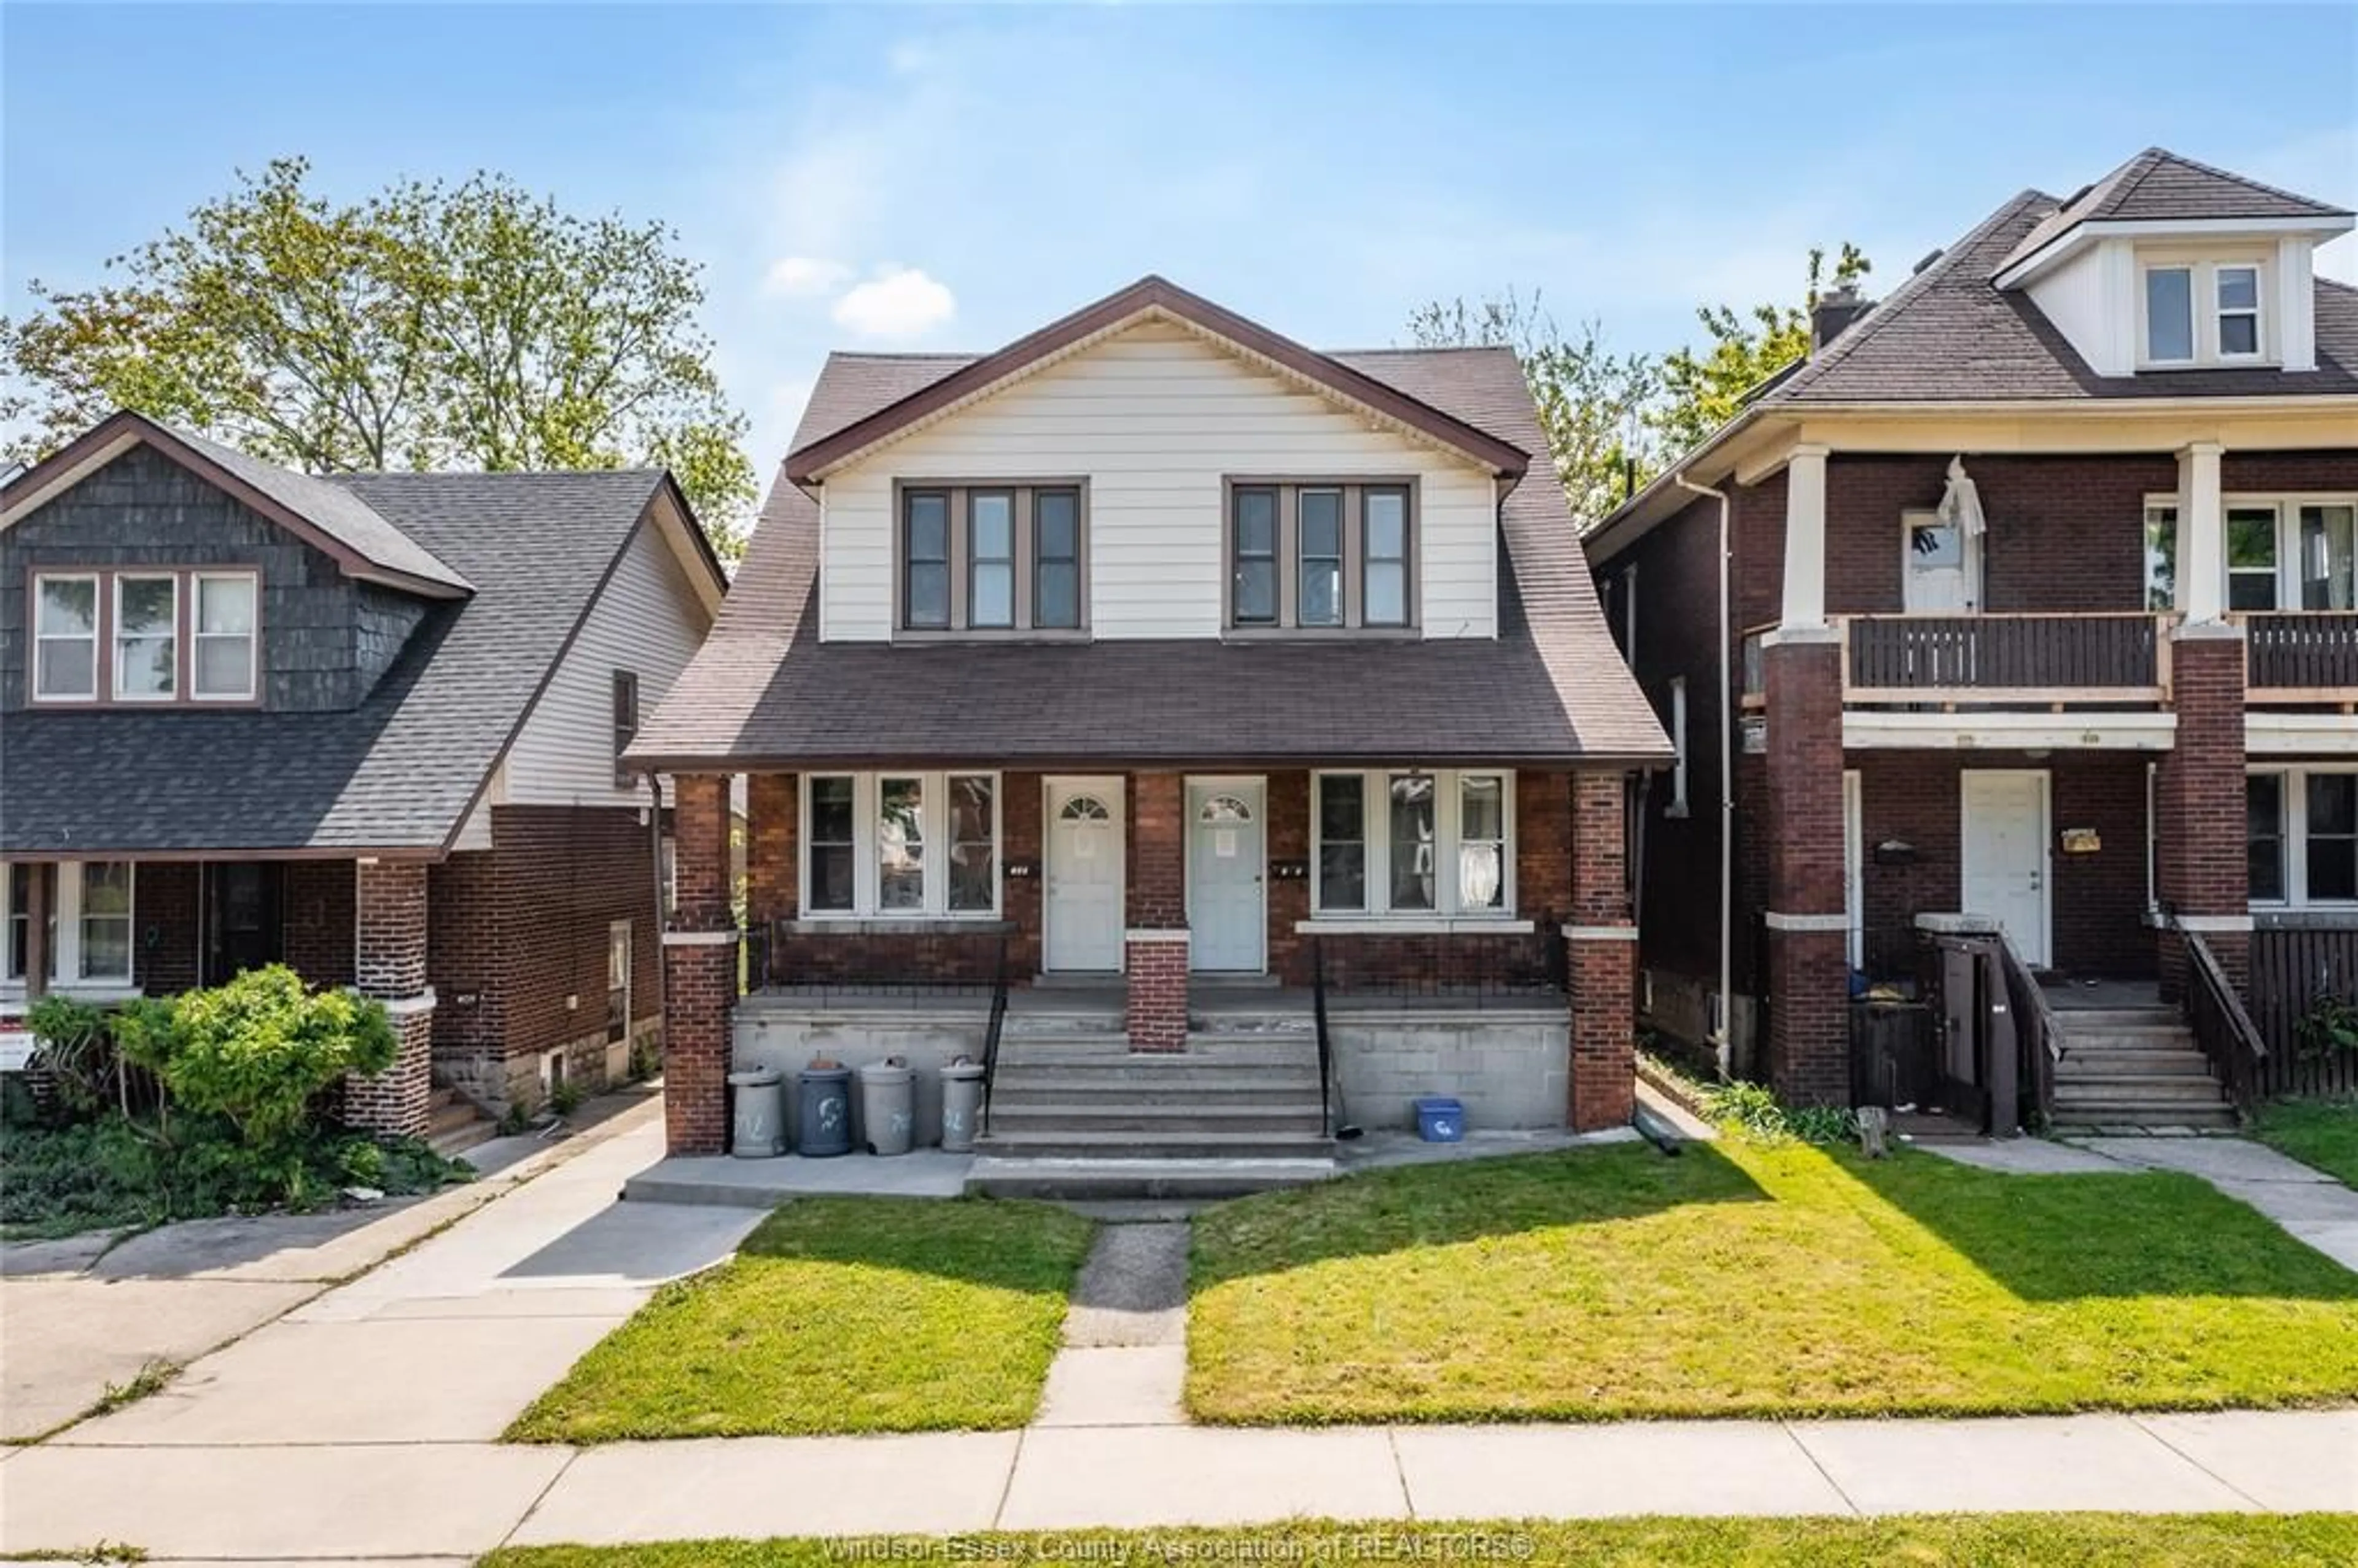 Home with brick exterior material for 703-705 PARTINGTON Ave, Windsor Ontario N9B 2N6